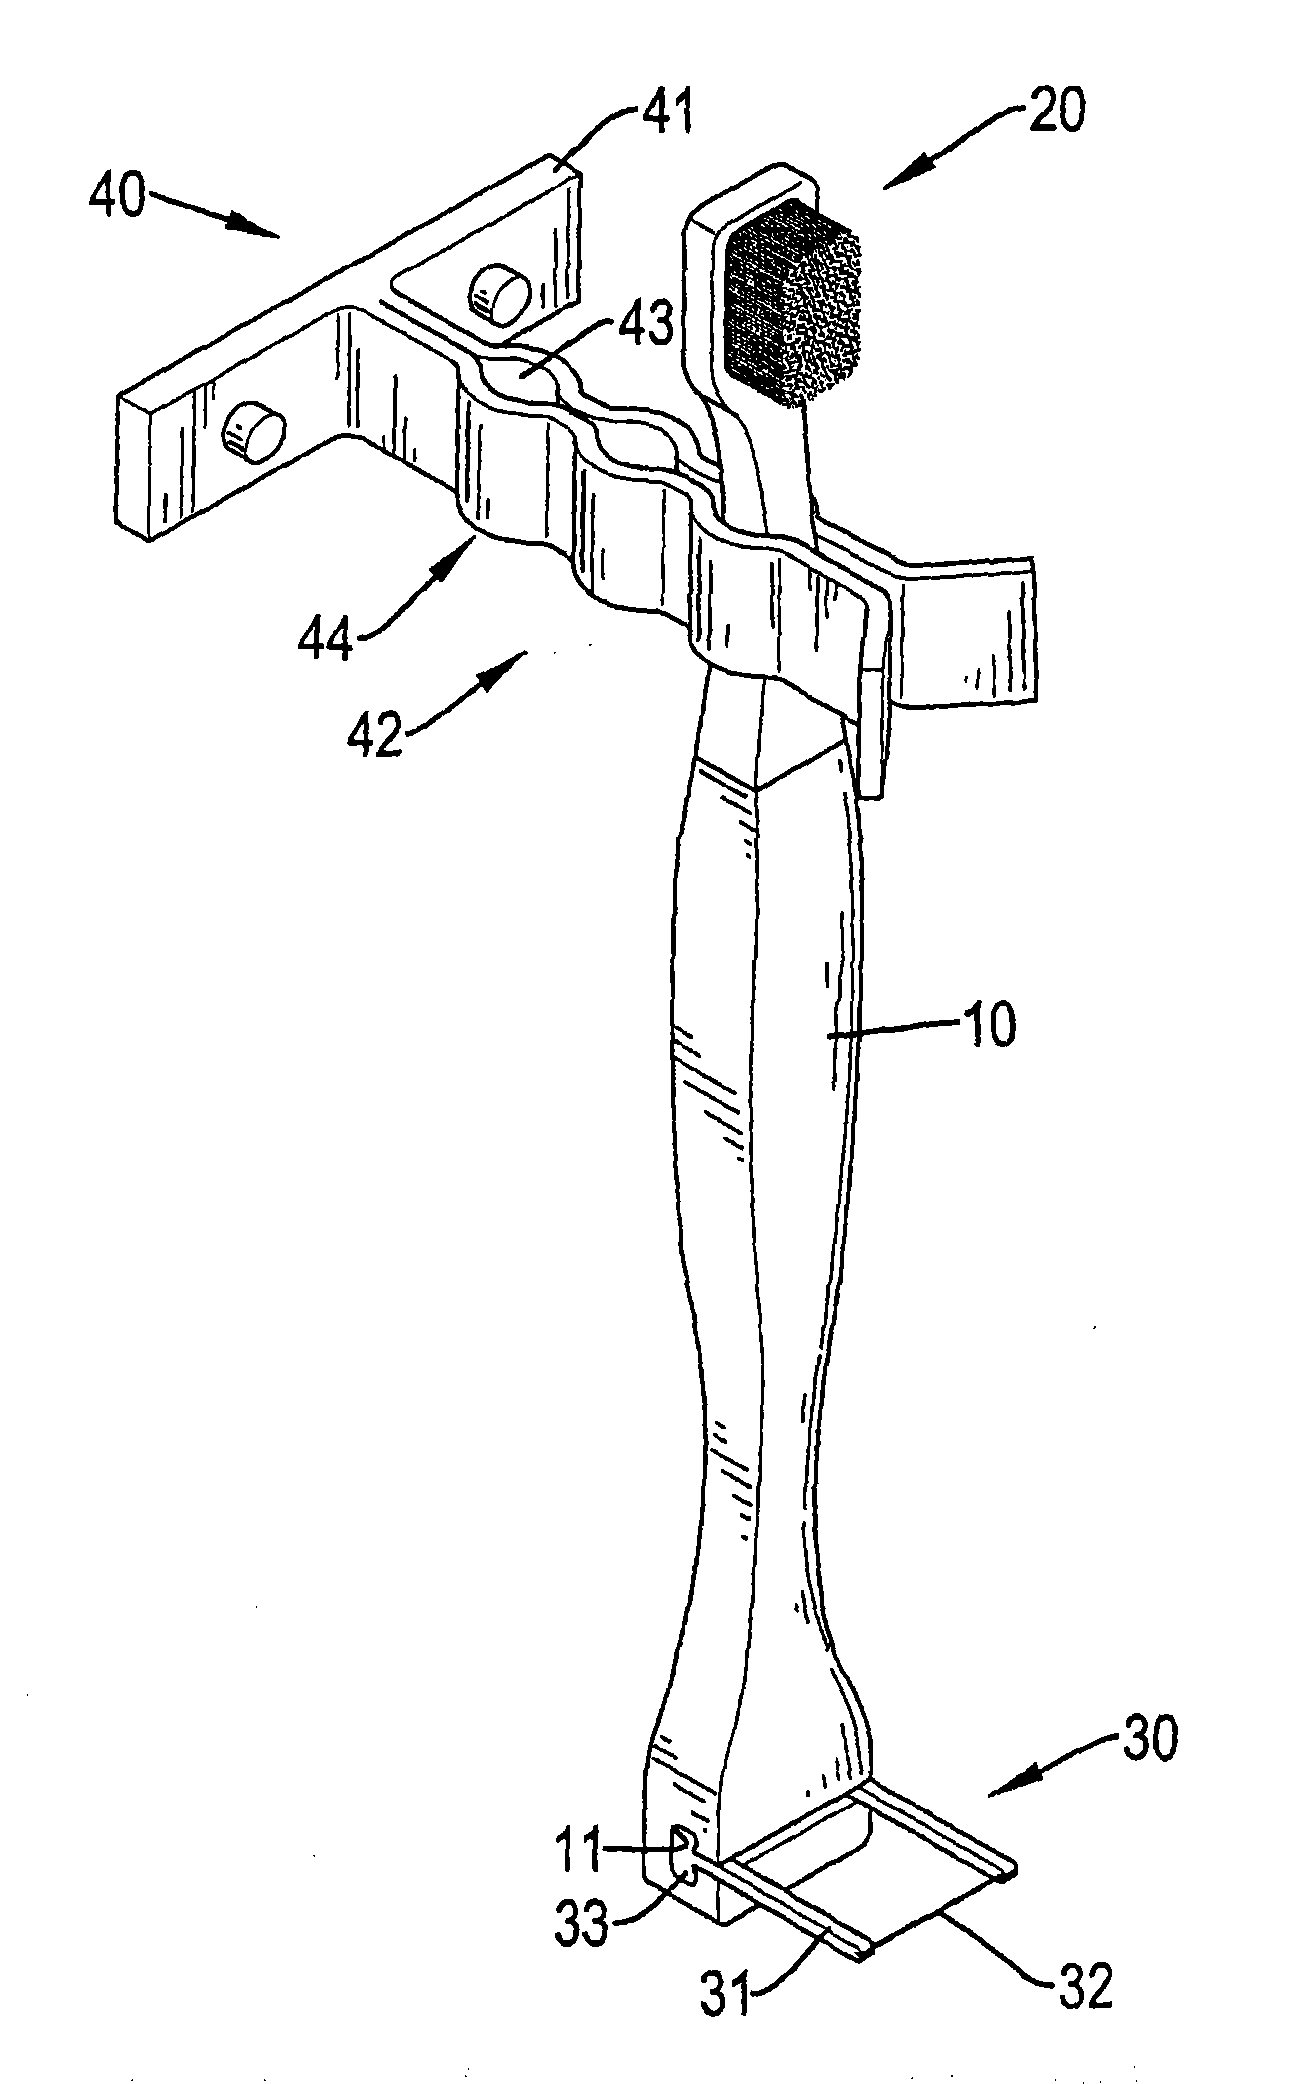 Tooth cleaning element, dental floss element and restoring force accommodating frame